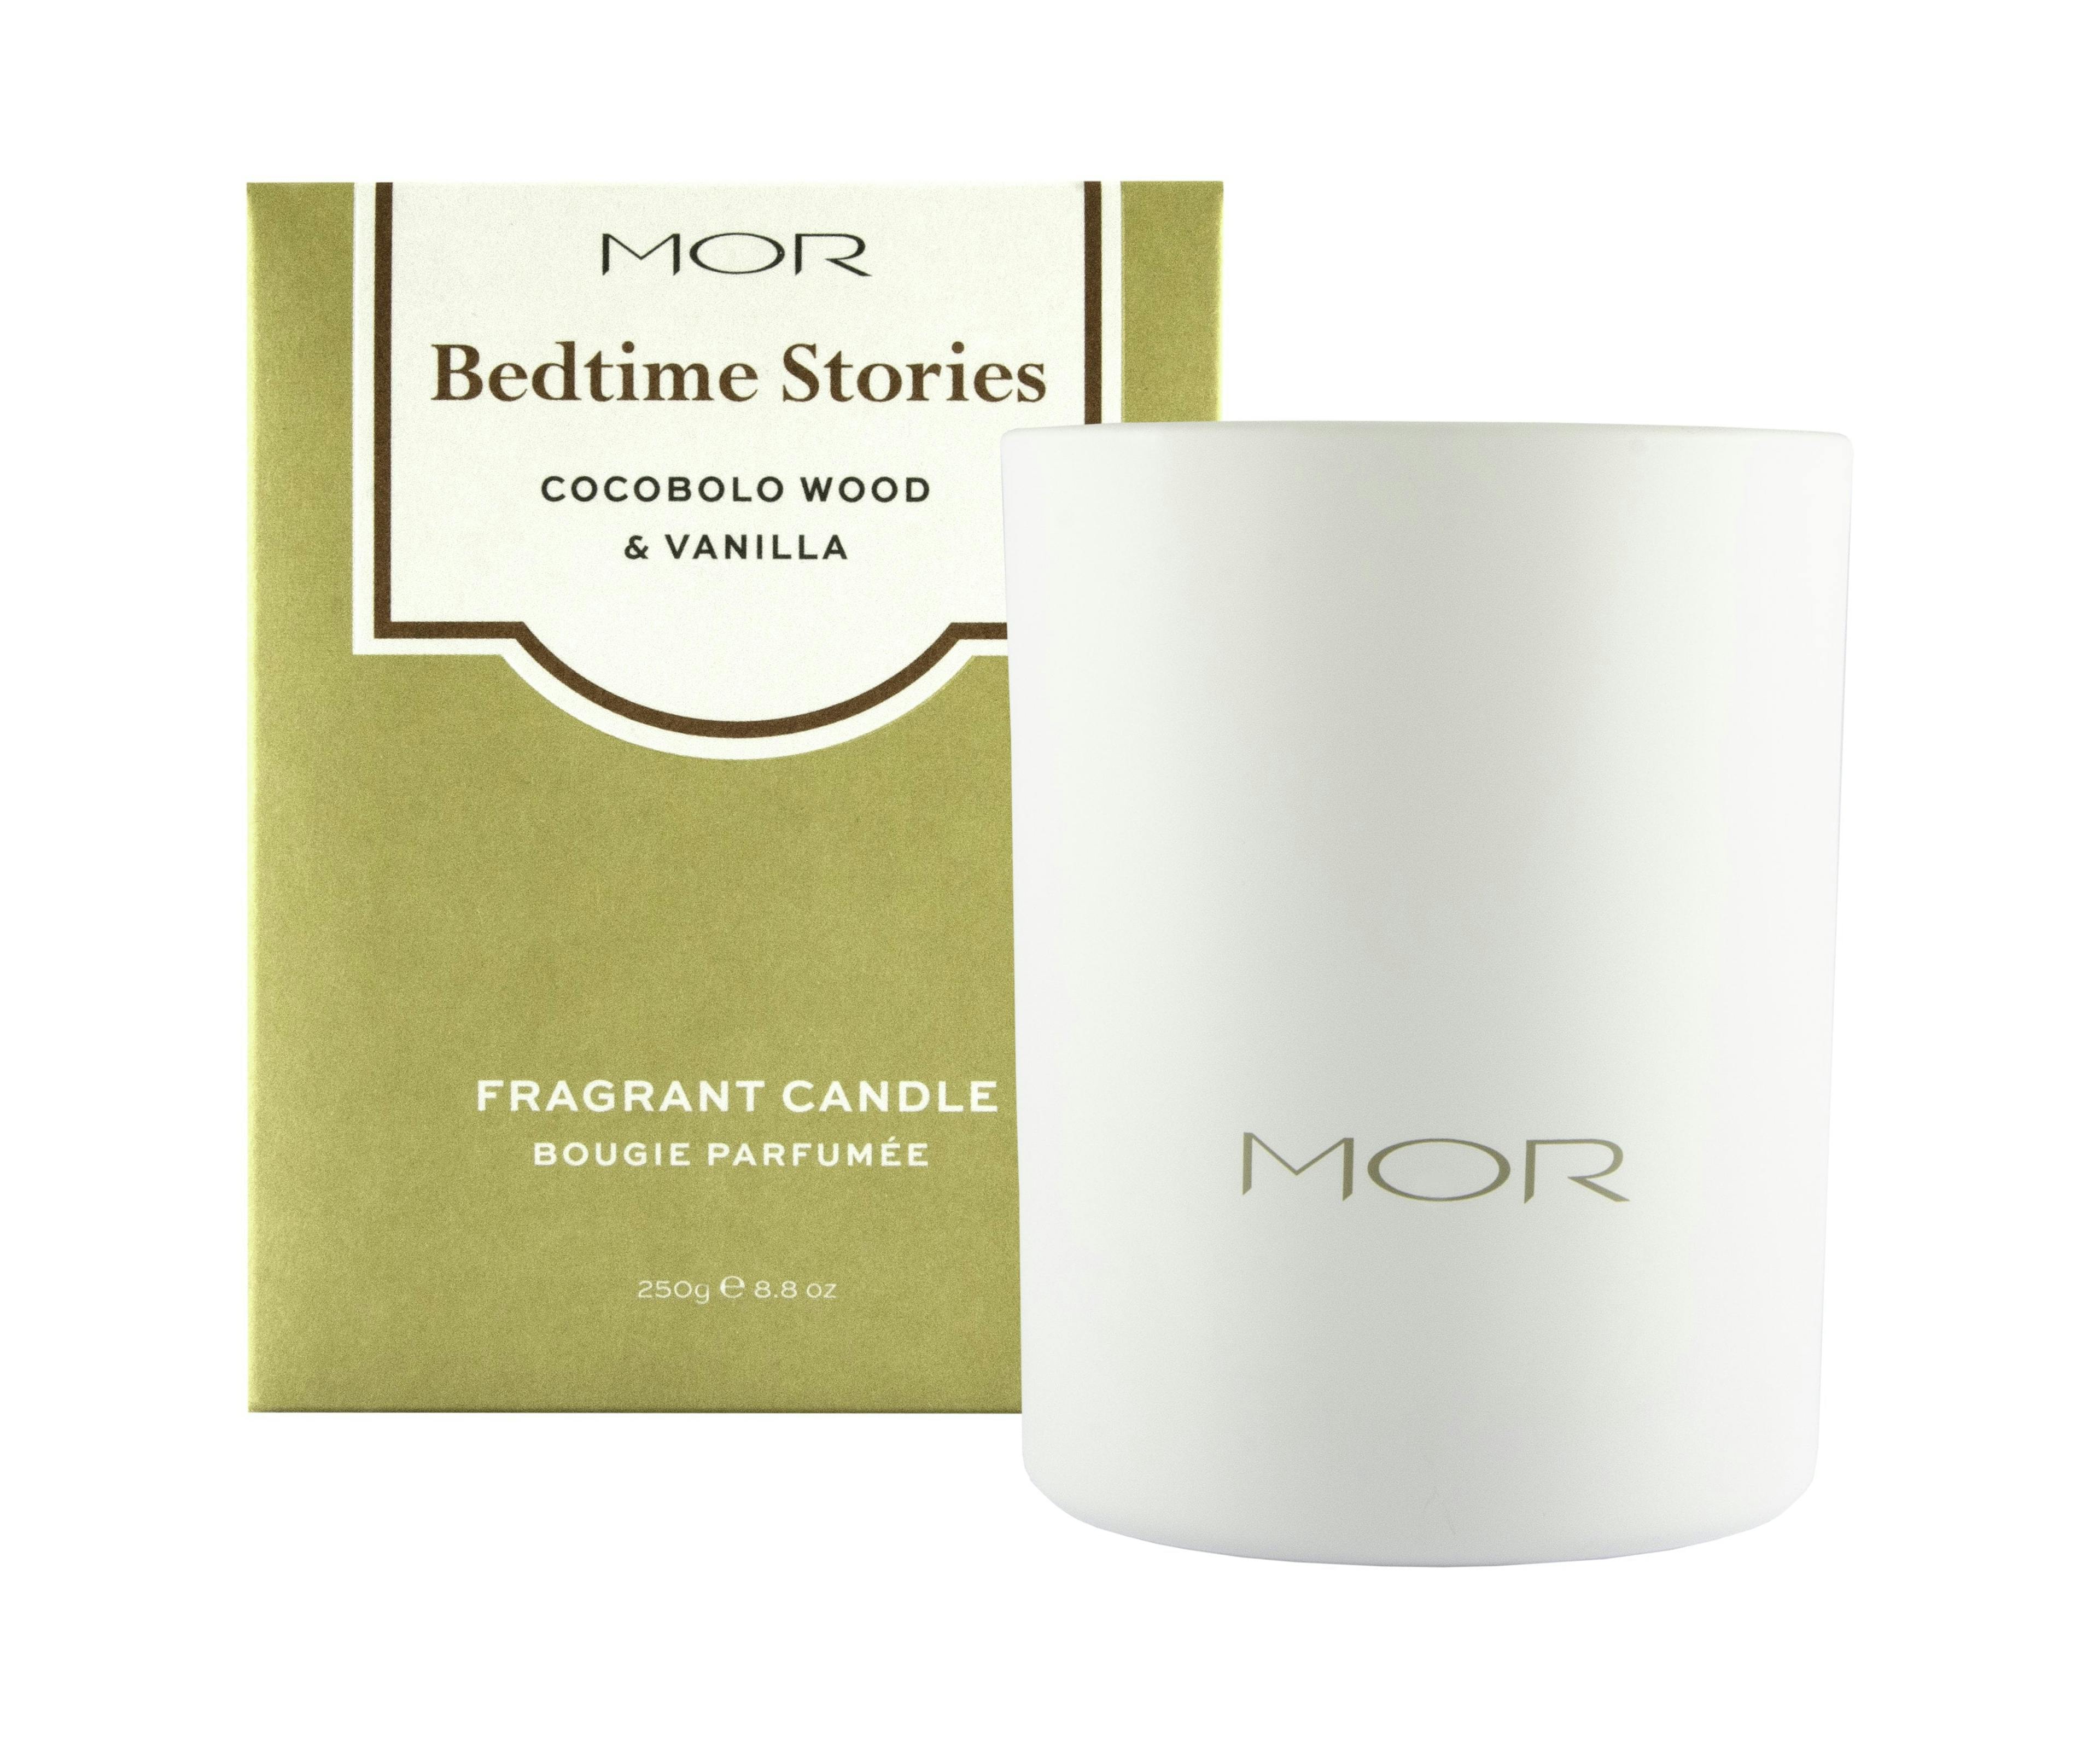 MOR Scented Home Library Bedtime Stories, Cocobola Wood & Vanilla Fragrant Candle